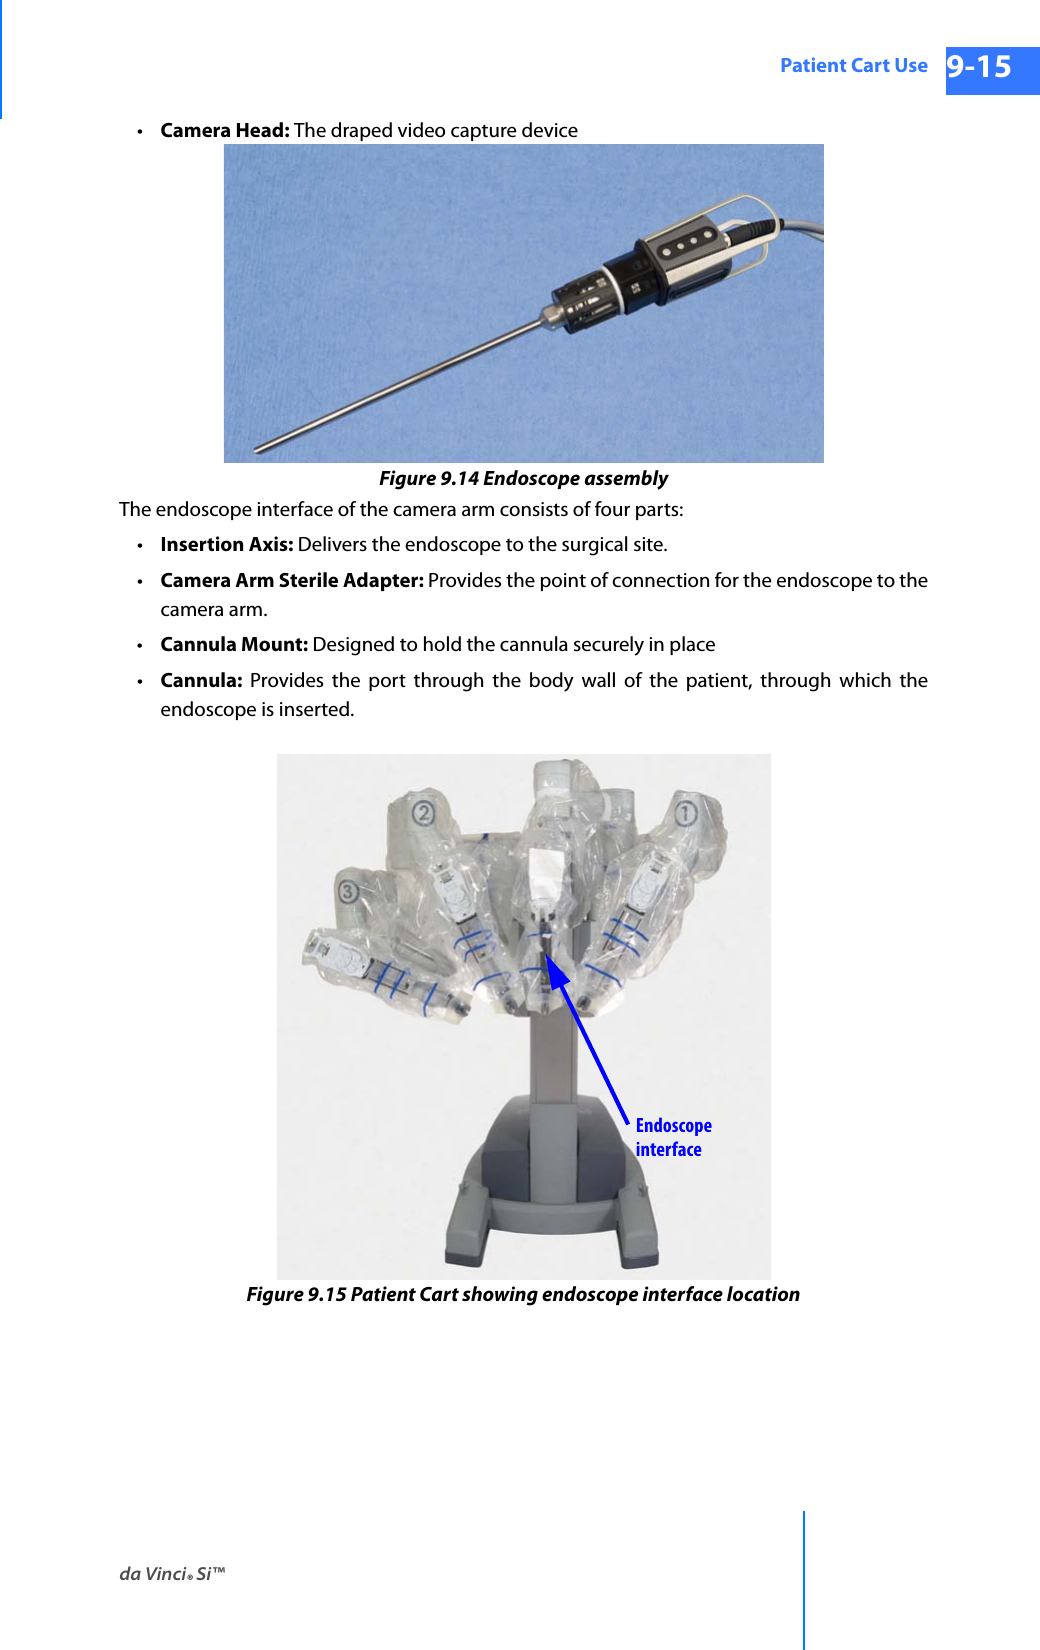 da Vinci® Si™Patient Cart Use 9-15DRAFT/PRE-RELEASE/CONFIDENTIAL 10/9/14•Camera Head: The draped video capture deviceFigure 9.14 Endoscope assemblyThe endoscope interface of the camera arm consists of four parts: •Insertion Axis: Delivers the endoscope to the surgical site.•Camera Arm Sterile Adapter: Provides the point of connection for the endoscope to the camera arm.•Cannula Mount: Designed to hold the cannula securely in place•Cannula: Provides the port through the body wall of the patient, through which the endoscope is inserted.Figure 9.15 Patient Cart showing endoscope interface locationEndoscopeinterface